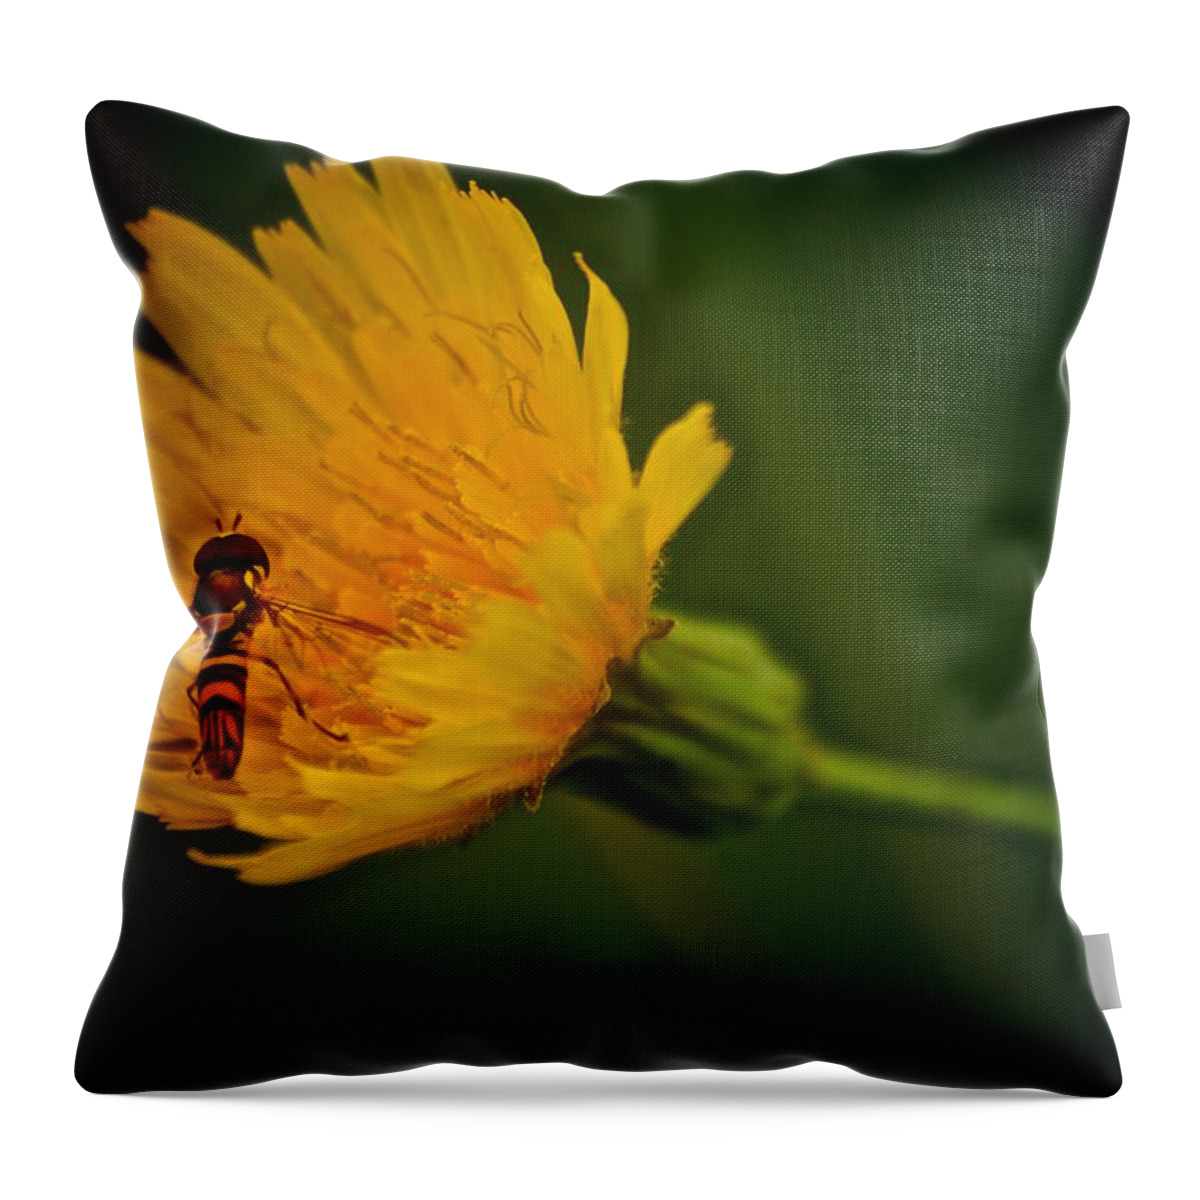 Fly Throw Pillow featuring the photograph Fly On A Flower by Prince Andre Faubert